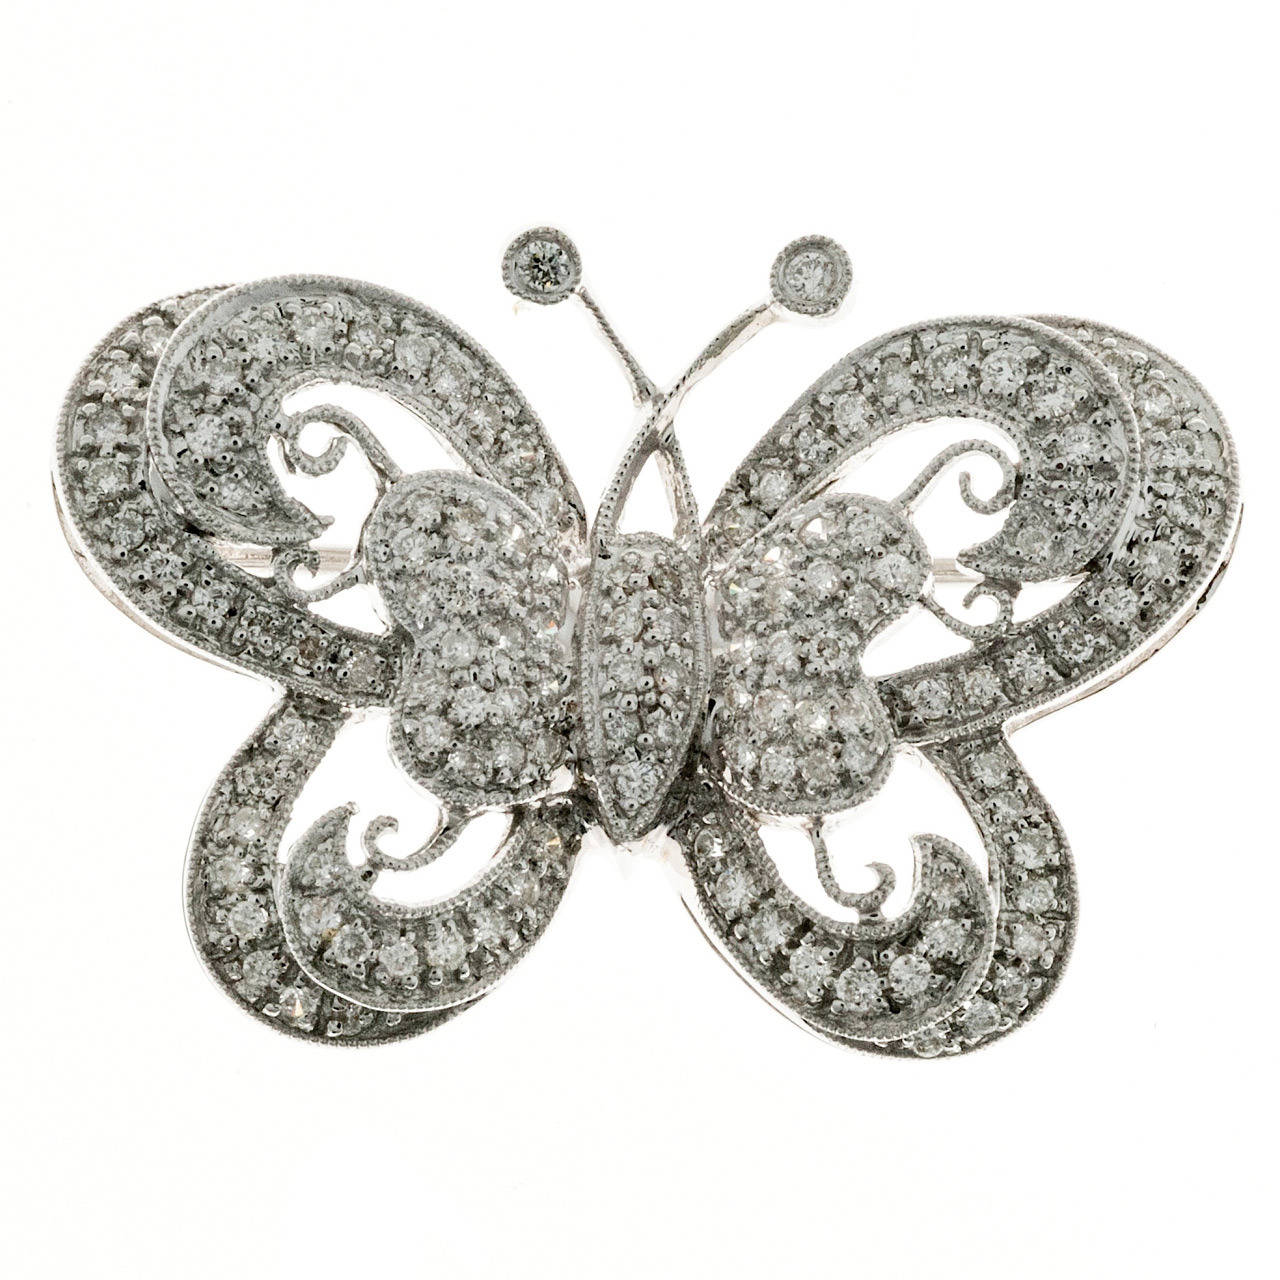 18k white gold pave set diamond butterfly open work pin brooche.   Circa 1960.

123 round diamonds approx. total weight 1.00cts all full cut, F, VS1 to SI1.
18k White Gold
Stamped 18k=750.
9.5 grams.
7/8 x 1 ¼ inches.